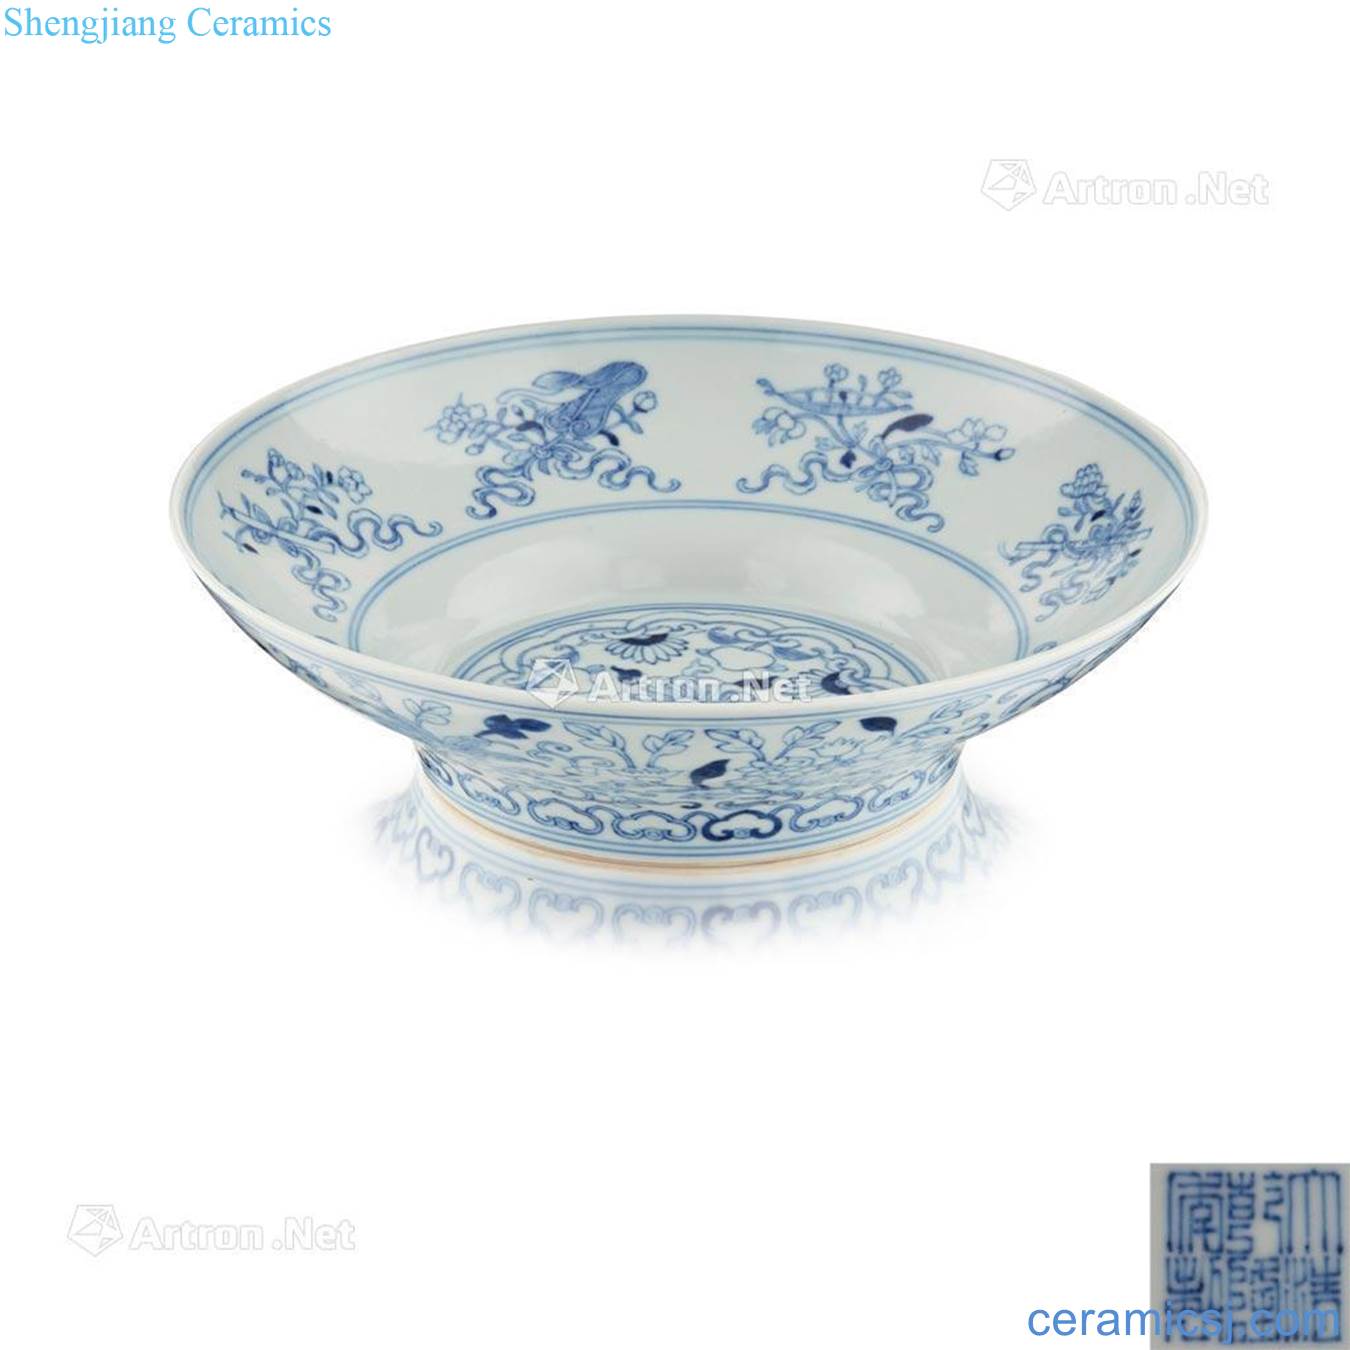 QIANLONG MARK AND OF THE PERIOD BLUE AND WHITE 'BAJIXIANG' DISH